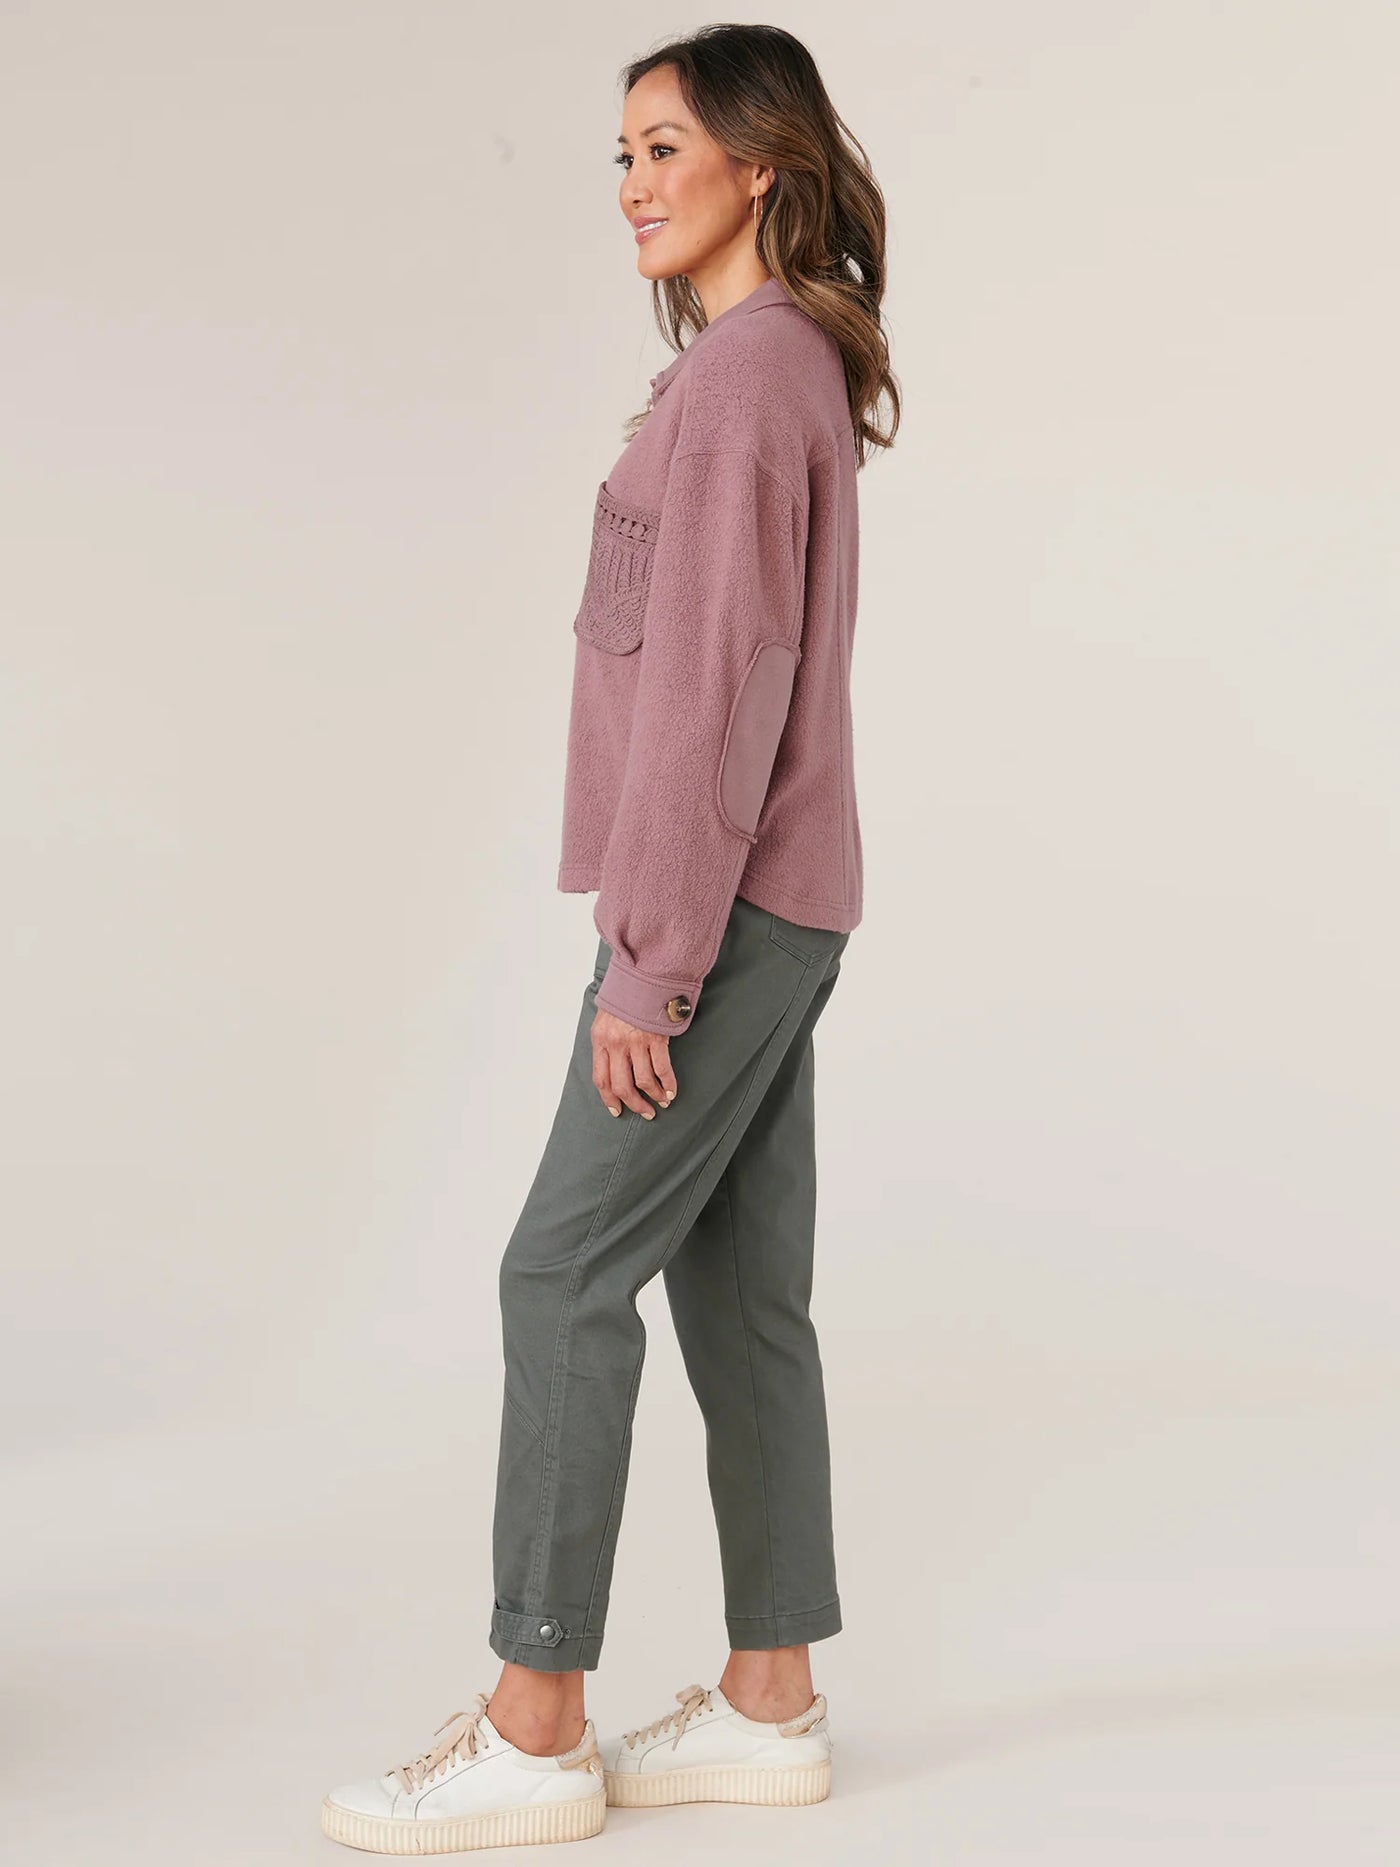 Long Sleeve Button Up Passimenterie Patch Pocket Cropped Jacket - Rose Taupe